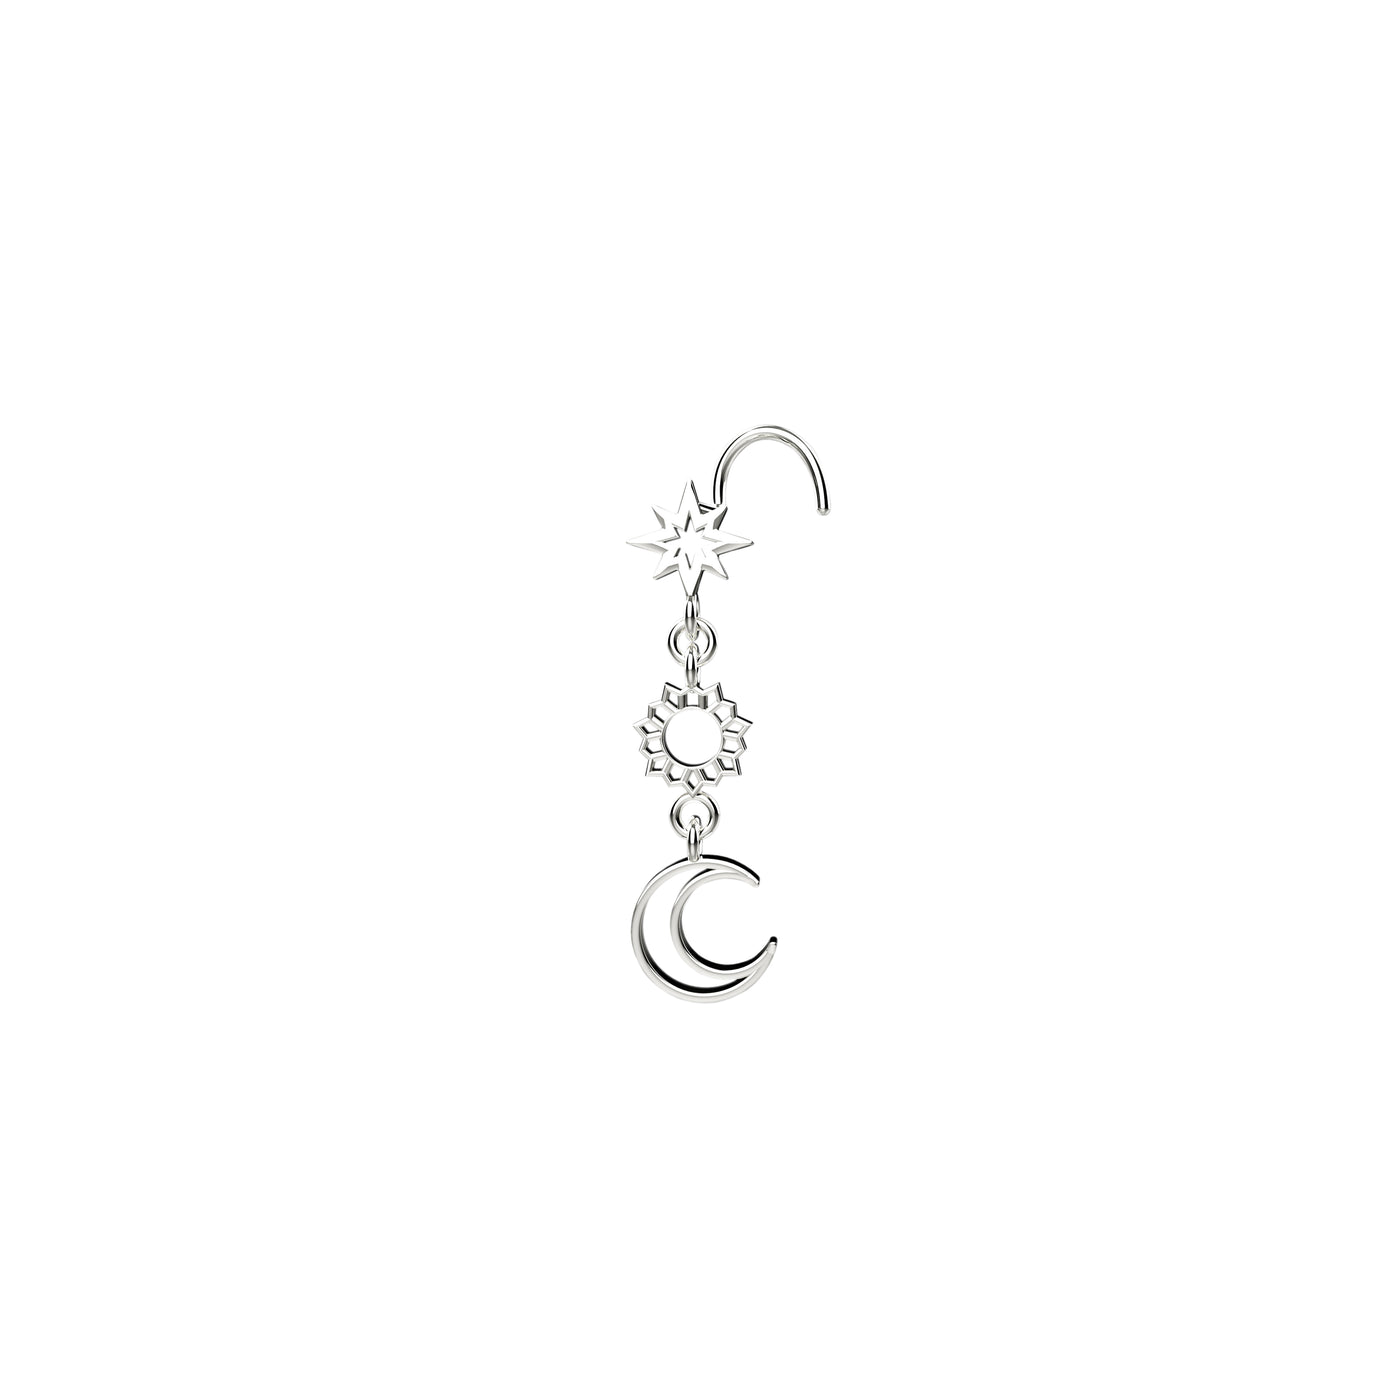 Moon Star Gold Plated Nose Rings